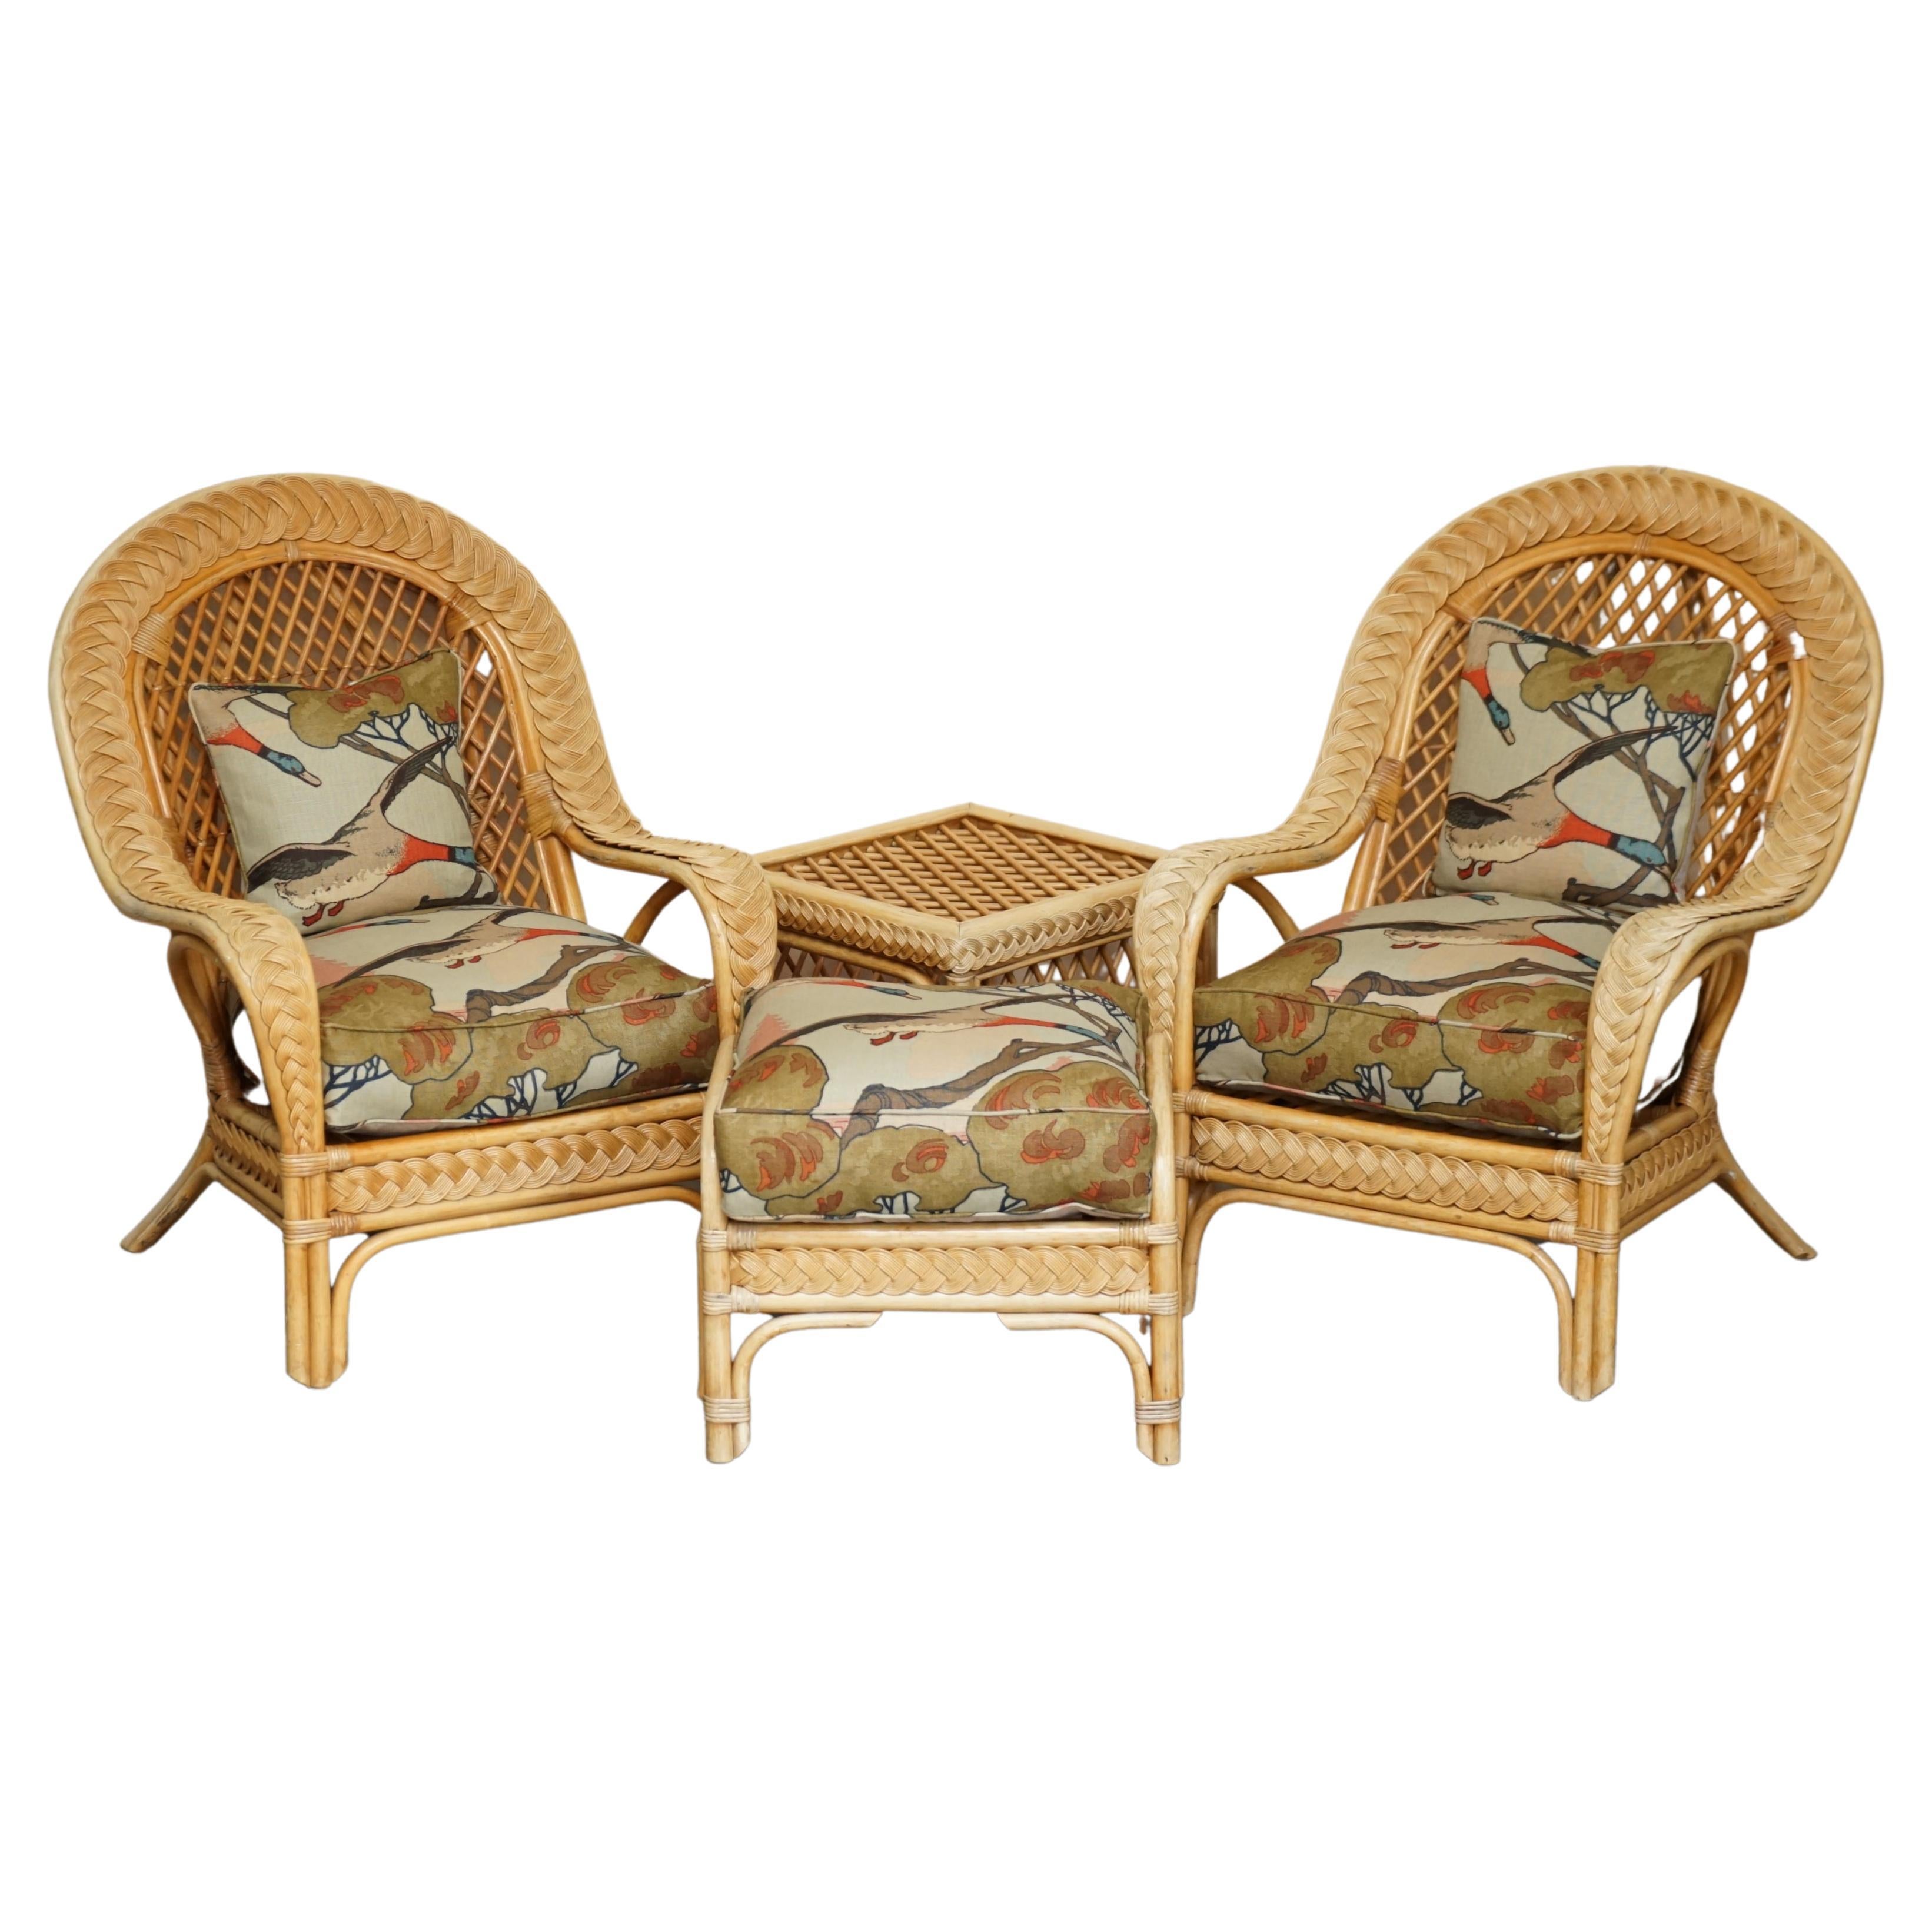 Table WICKER ARMCHAIRS STOOL TABLE SUITE rembourrée WiTH MULBERRY FLYING DUCKS FABRIC